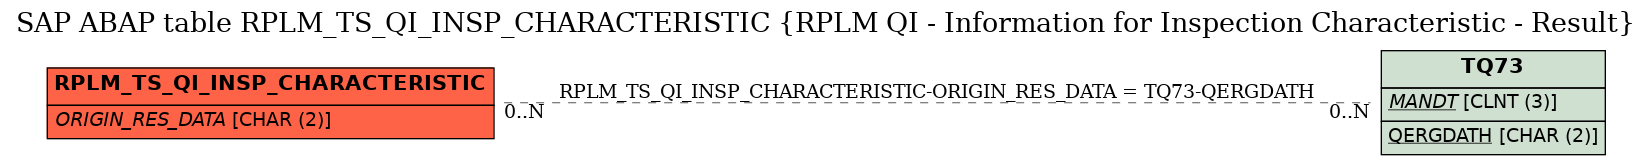 E-R Diagram for table RPLM_TS_QI_INSP_CHARACTERISTIC (RPLM QI - Information for Inspection Characteristic - Result)